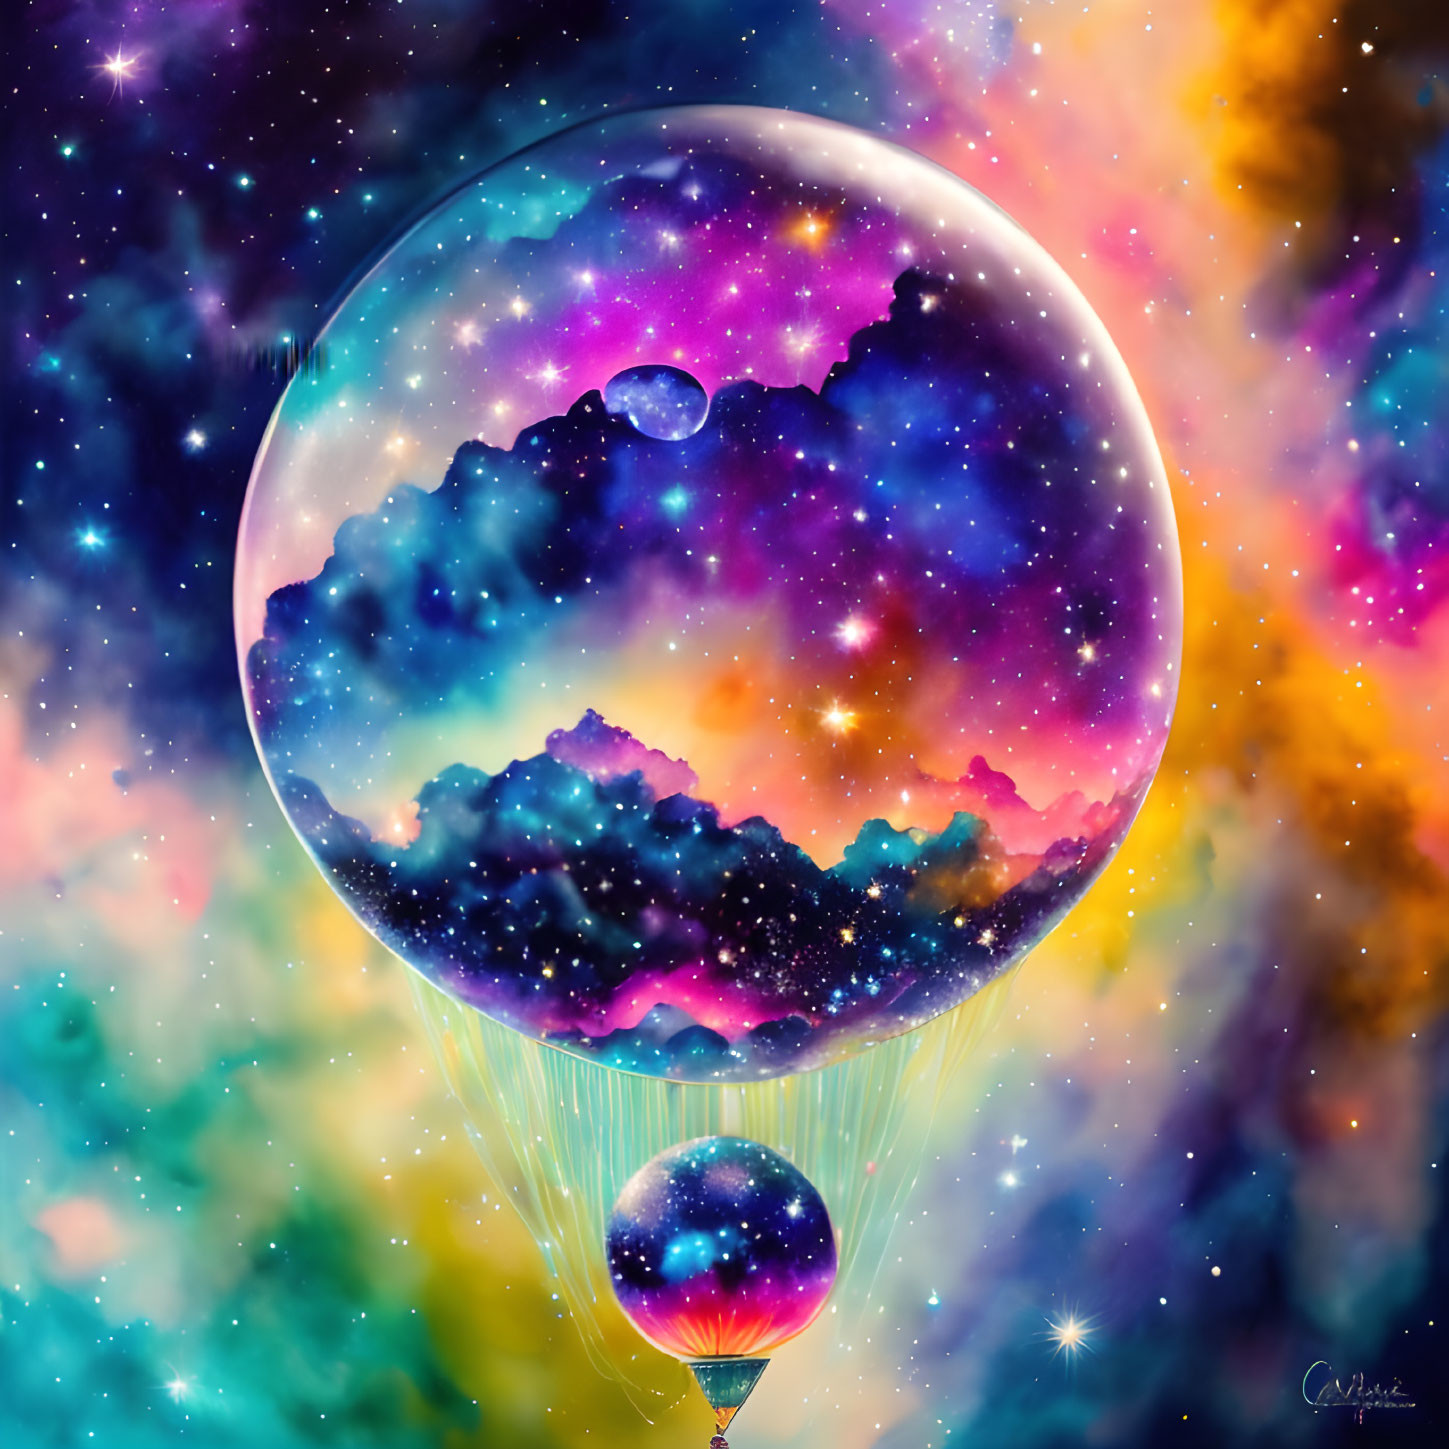 Colorful Digital Artwork: Balloon-like Sphere with Cosmic Landscape Against Starry Nebula